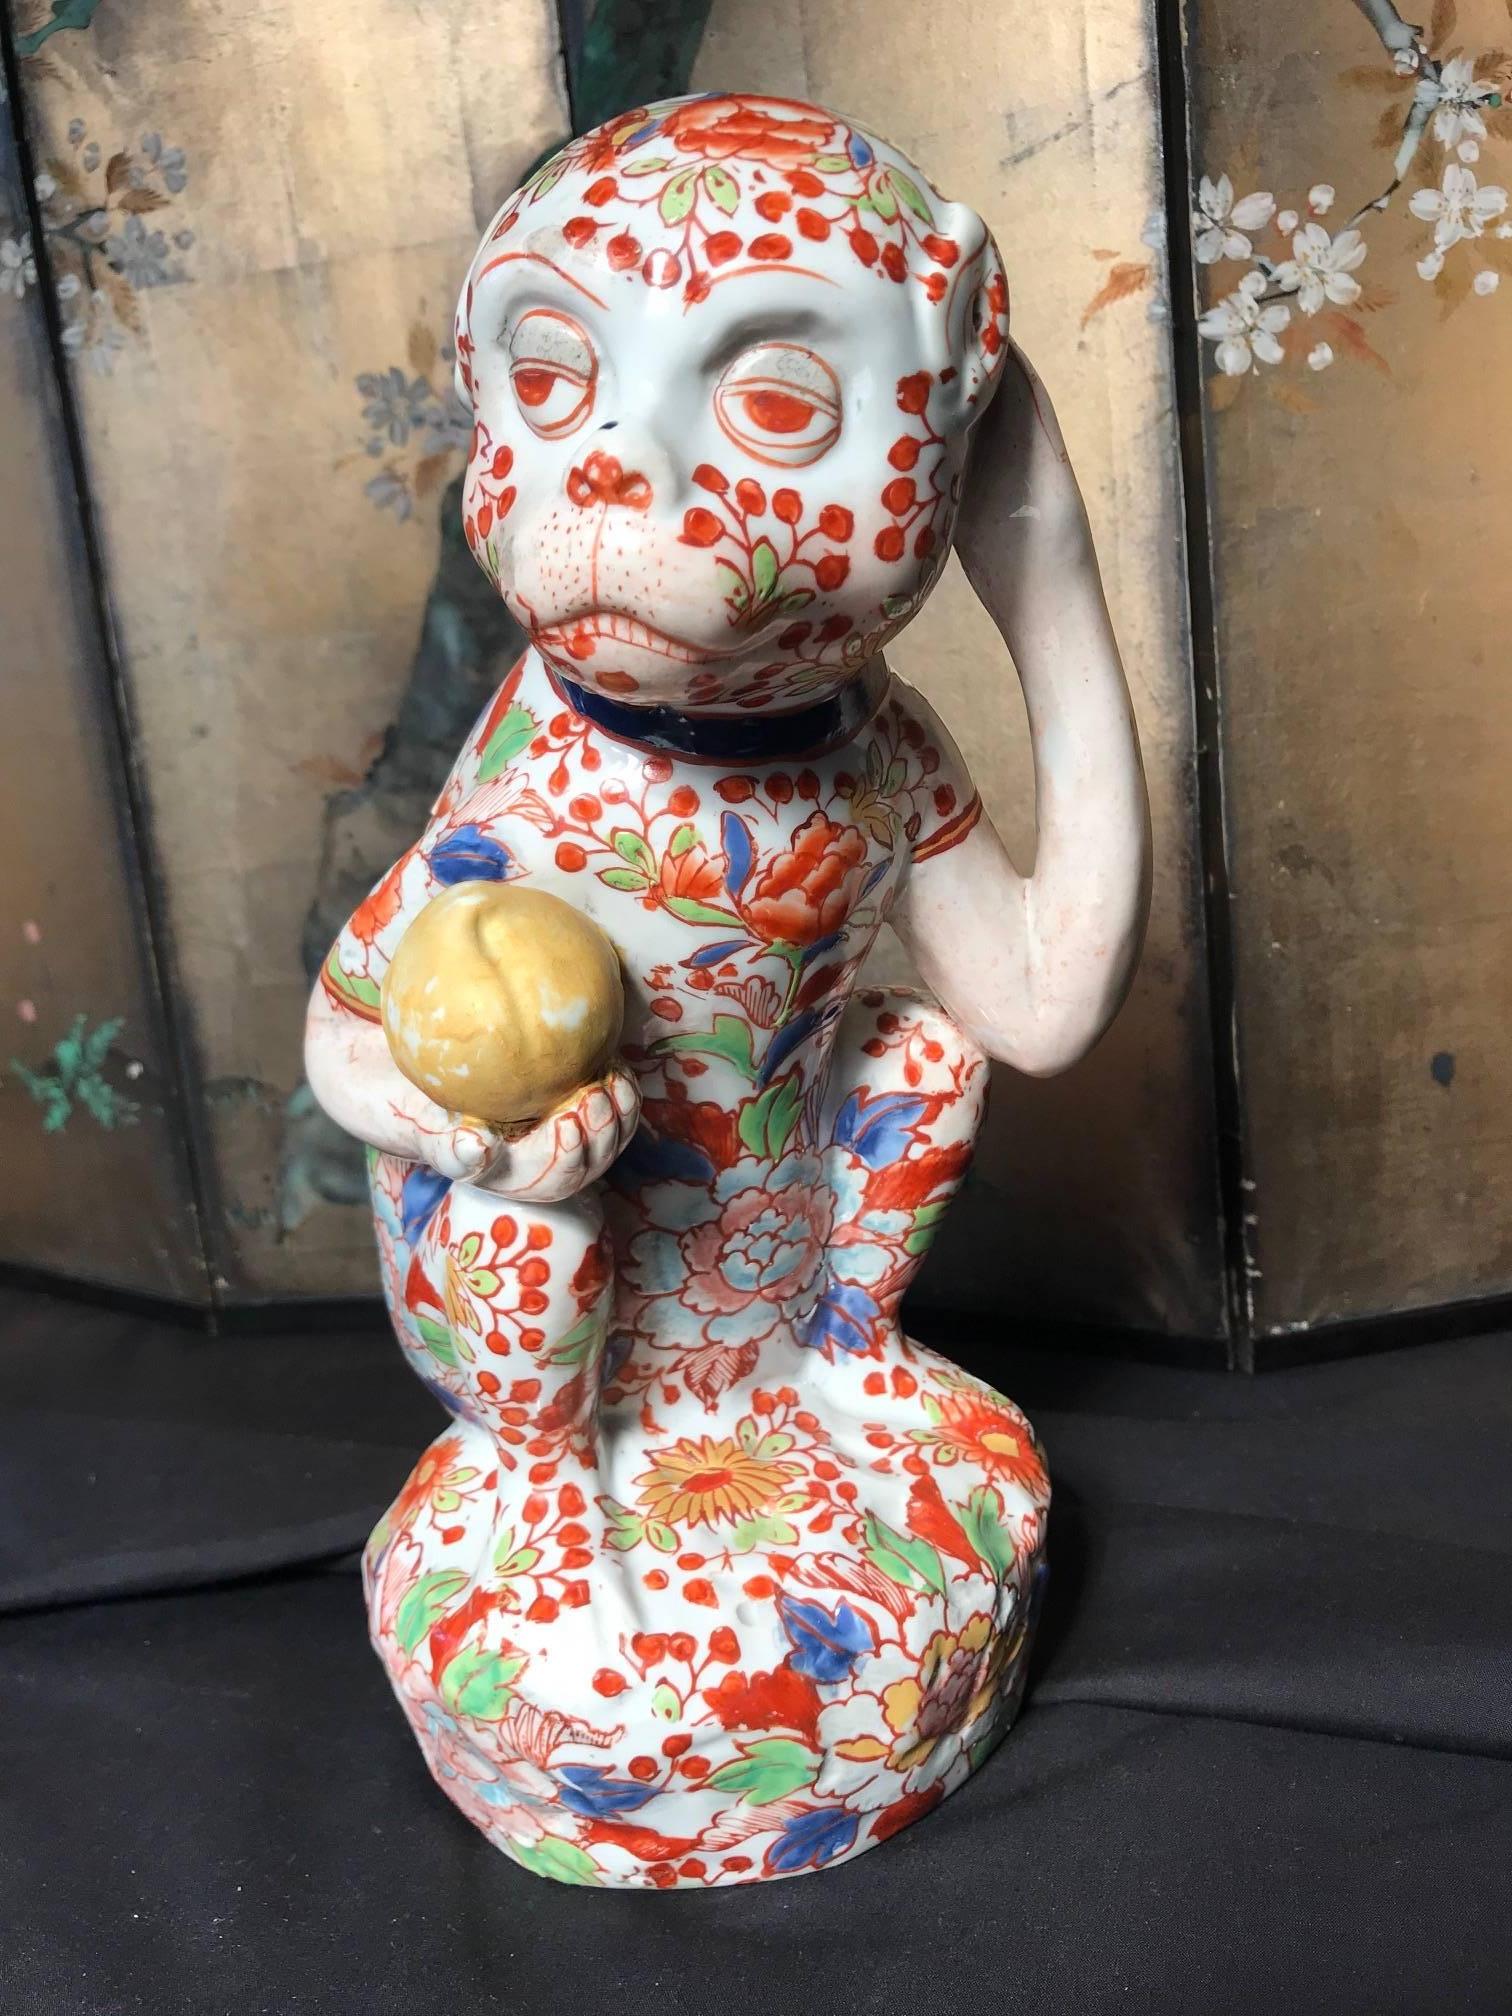 Japanese red enameled porcelain monkey holding the peach of immortality, sculpture Okimono signed base.

Maker: Imari red enamels over blue, yellow, and green under glazing

Dimensions: Big 11 inches tall and 7 inches wide and 5 inches deep

A large